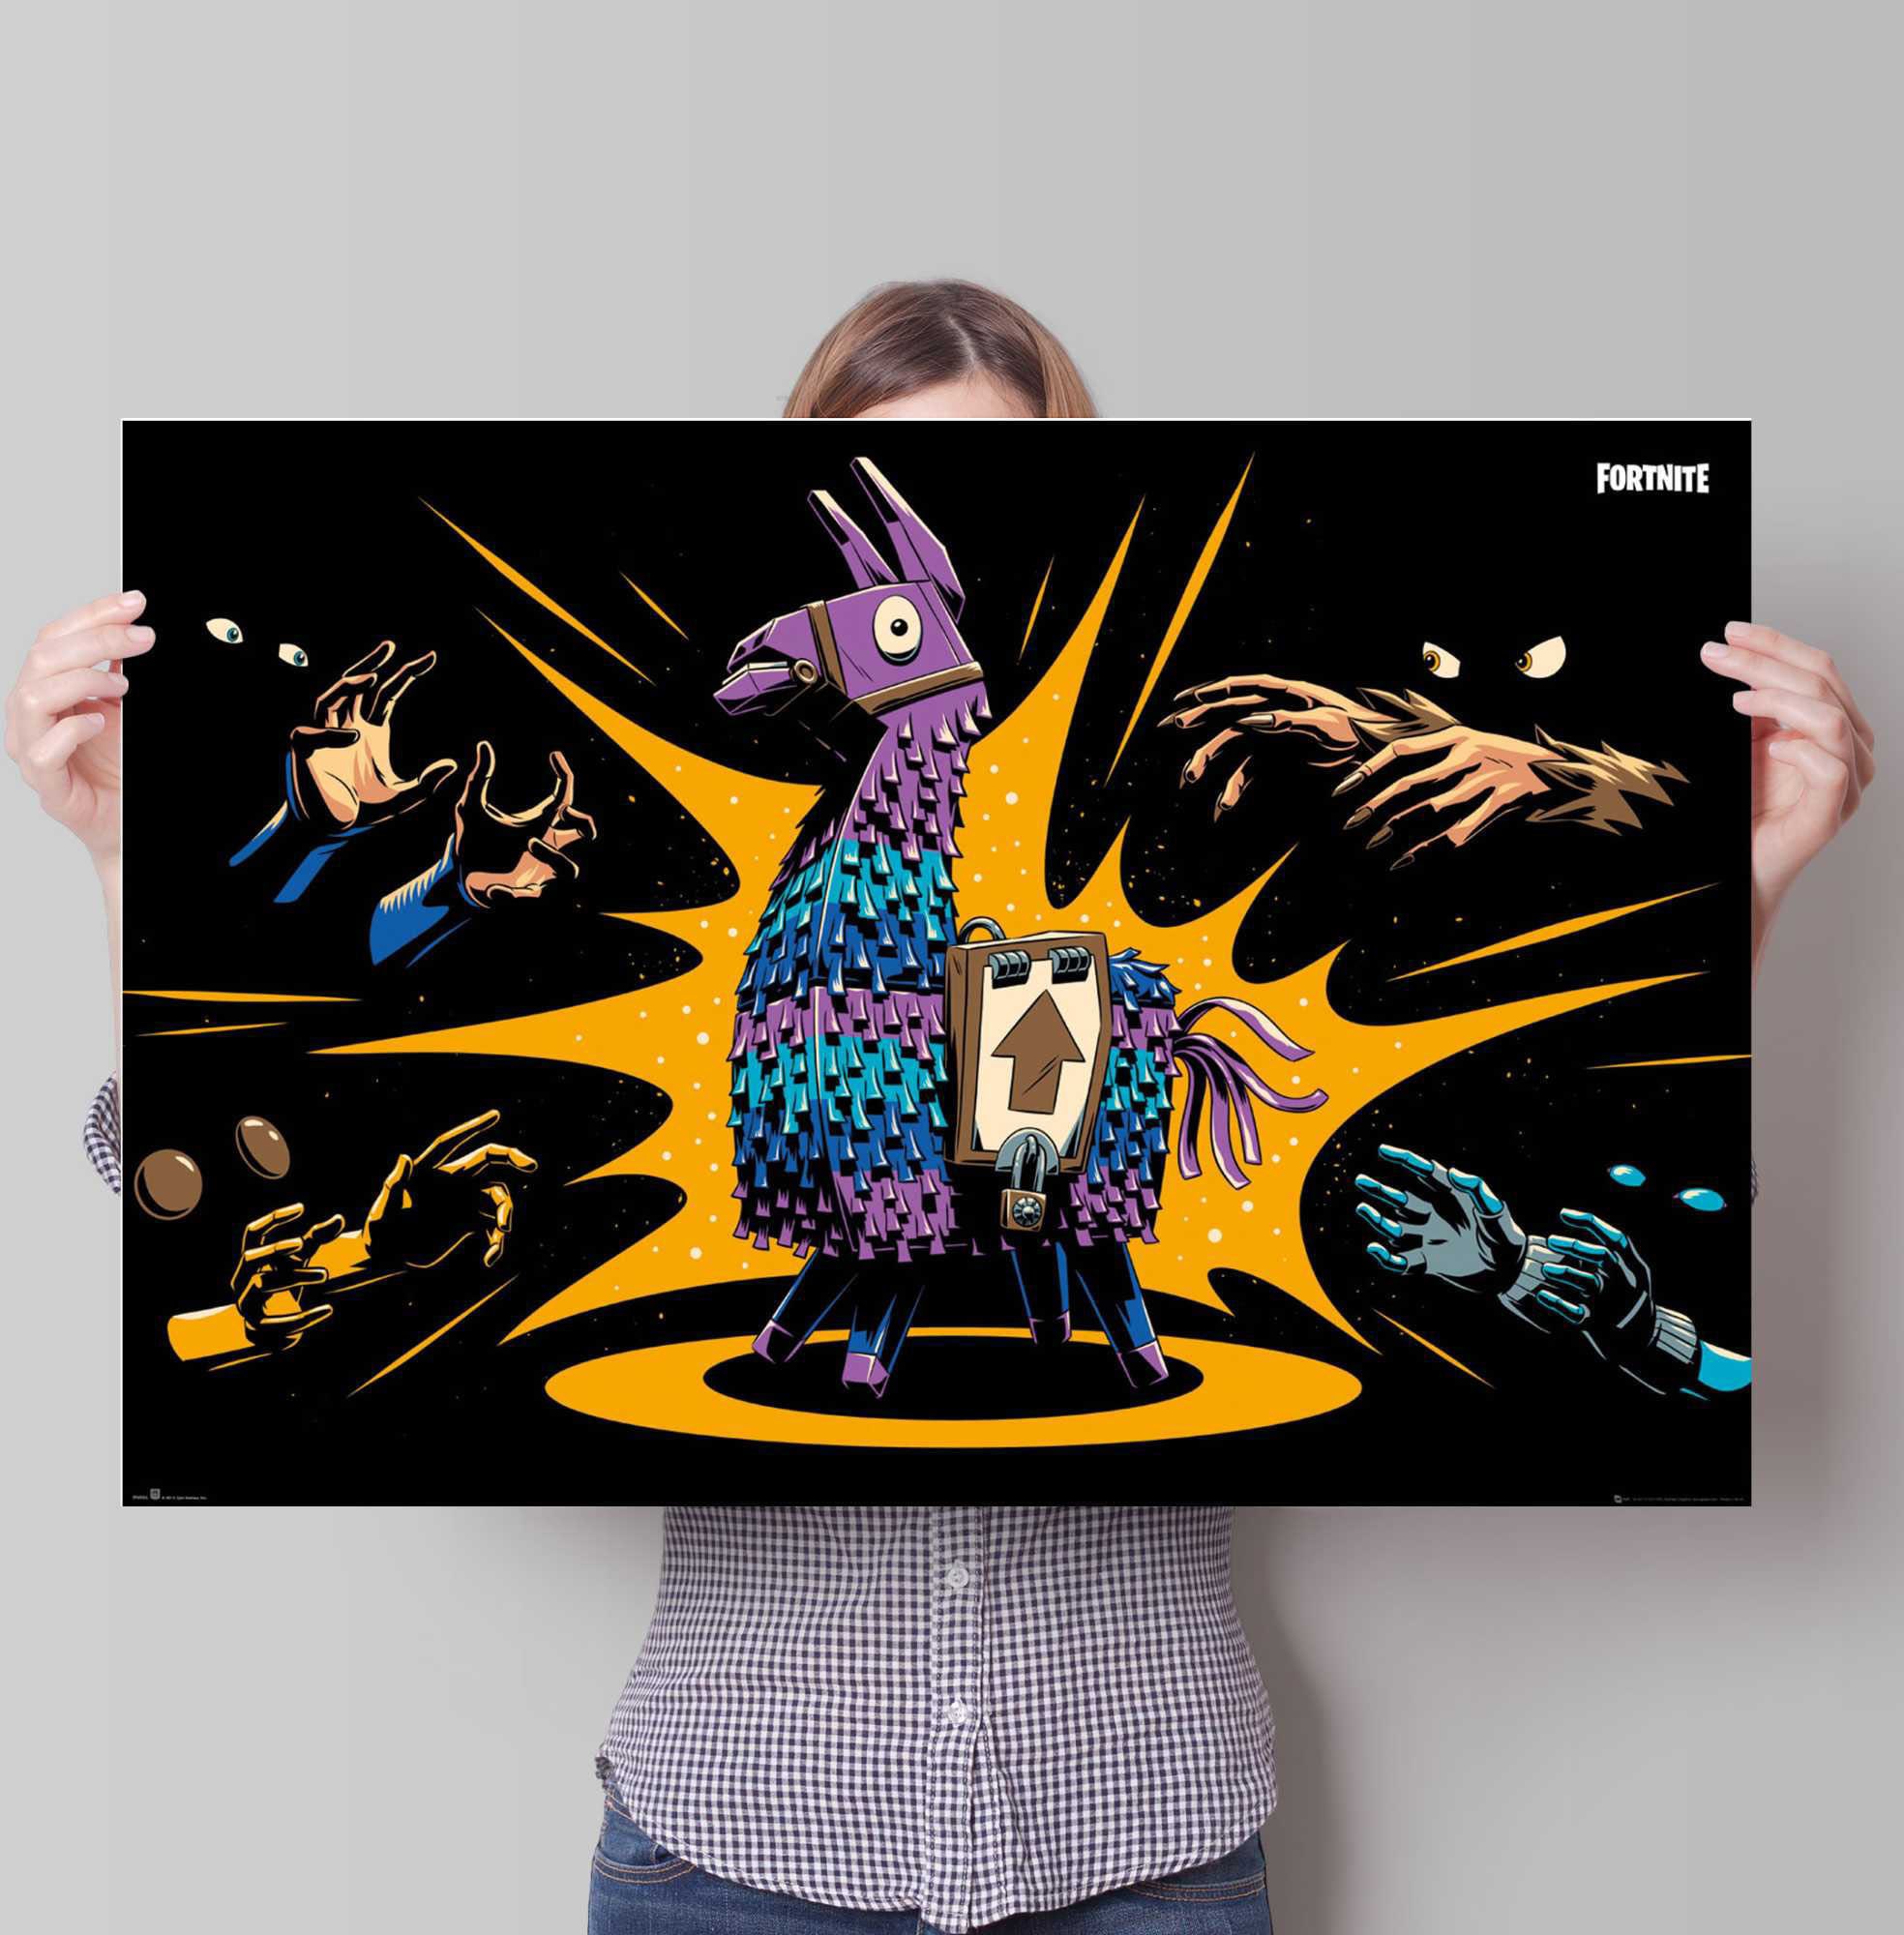 Reinders! Poster »Poster Fortnite Loot Llama - Game«, Spiele, (1 St.)  bequem kaufen